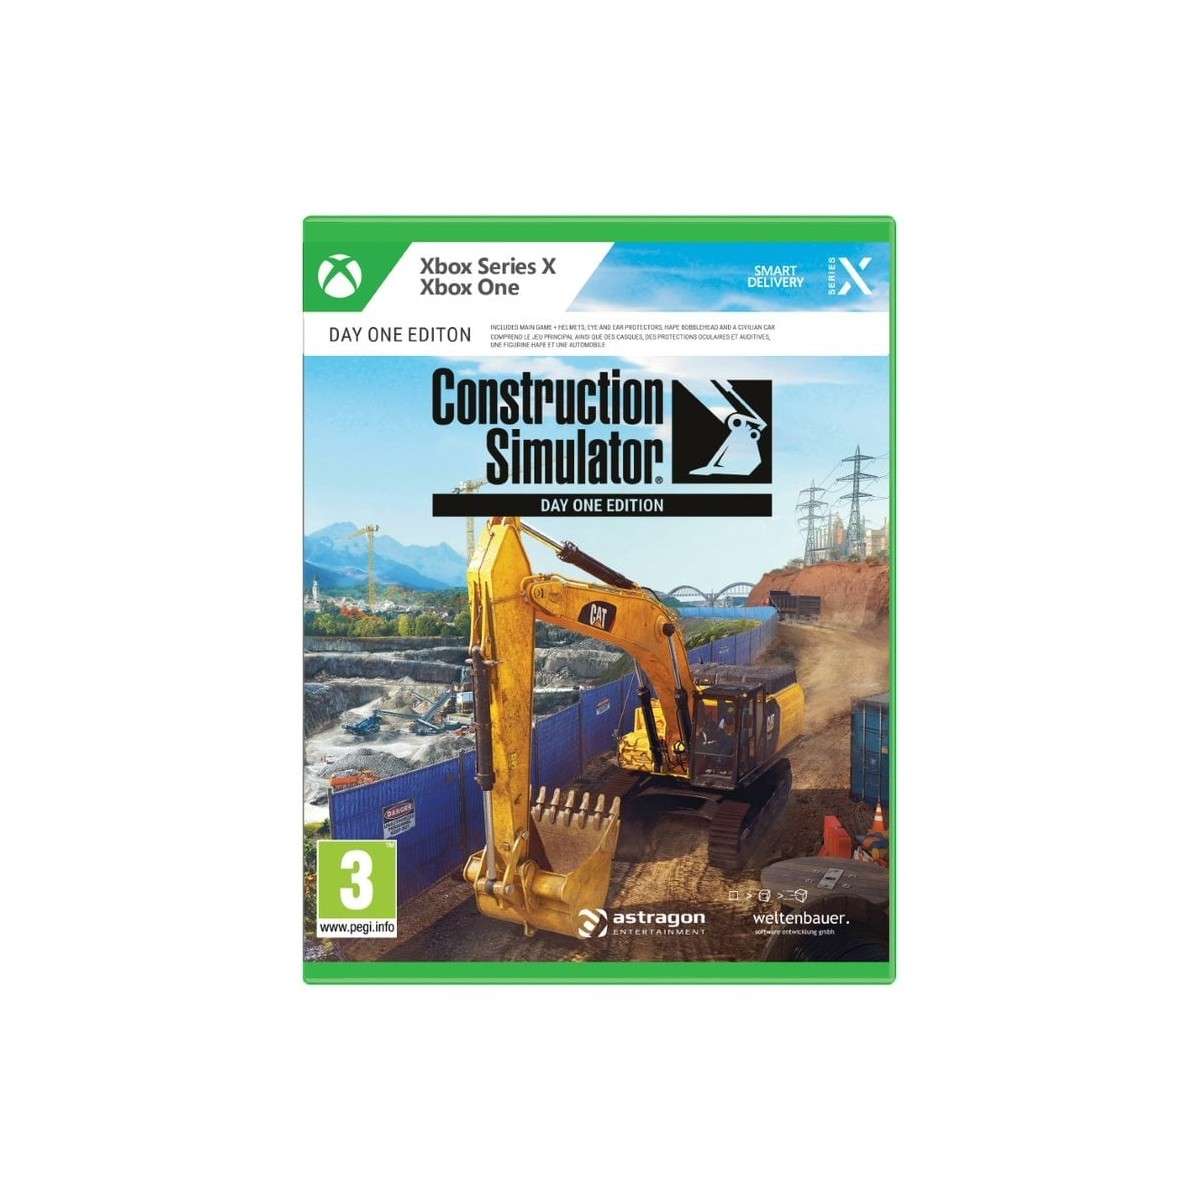 Construction (Day Videojuegos Xbox Edition) with X for - One Simulator Build Diagnose Series and